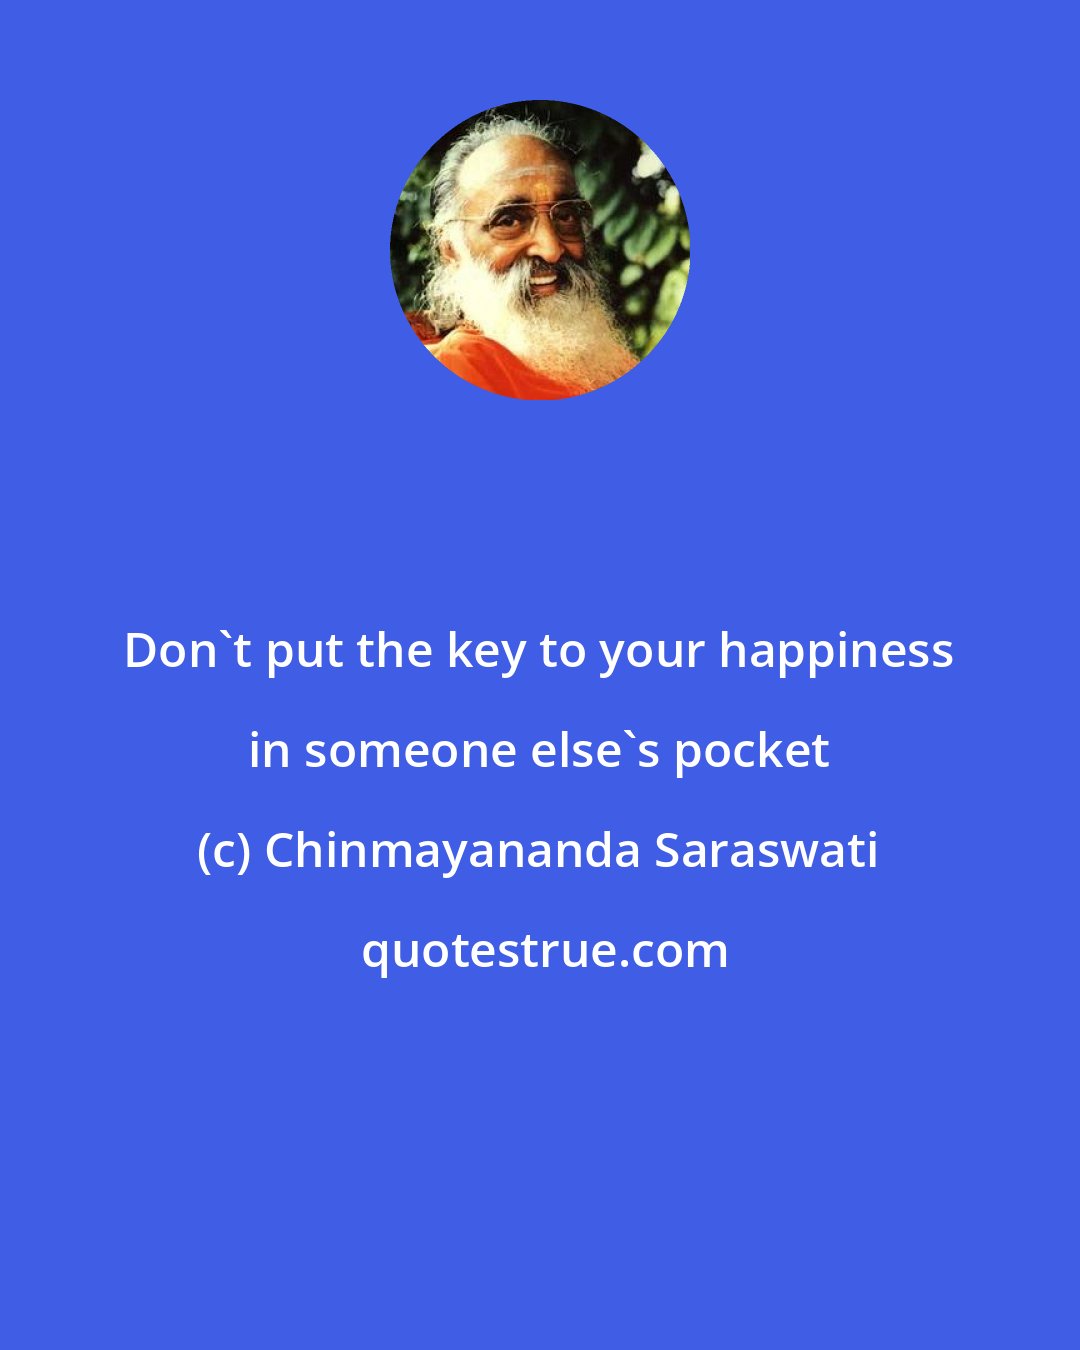 Chinmayananda Saraswati: Don't put the key to your happiness in someone else's pocket